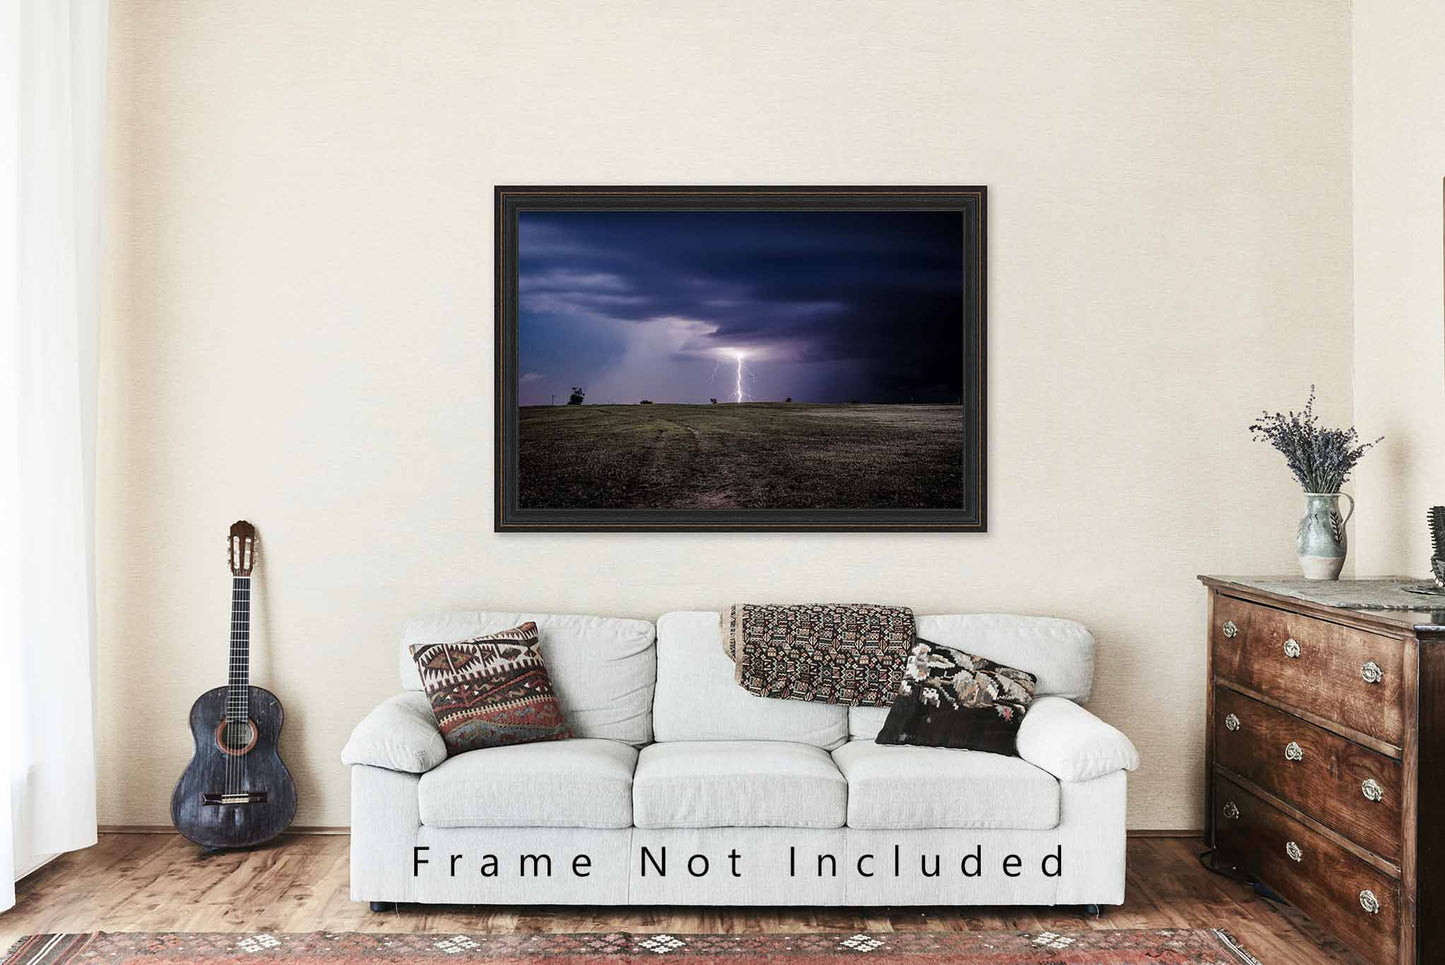 Storm Photography Print - Picture of Lightning Bolt on Stormy Night in Oklahoma - Weather Wall Art Thunderstorm Sky Photo Artwork Decor